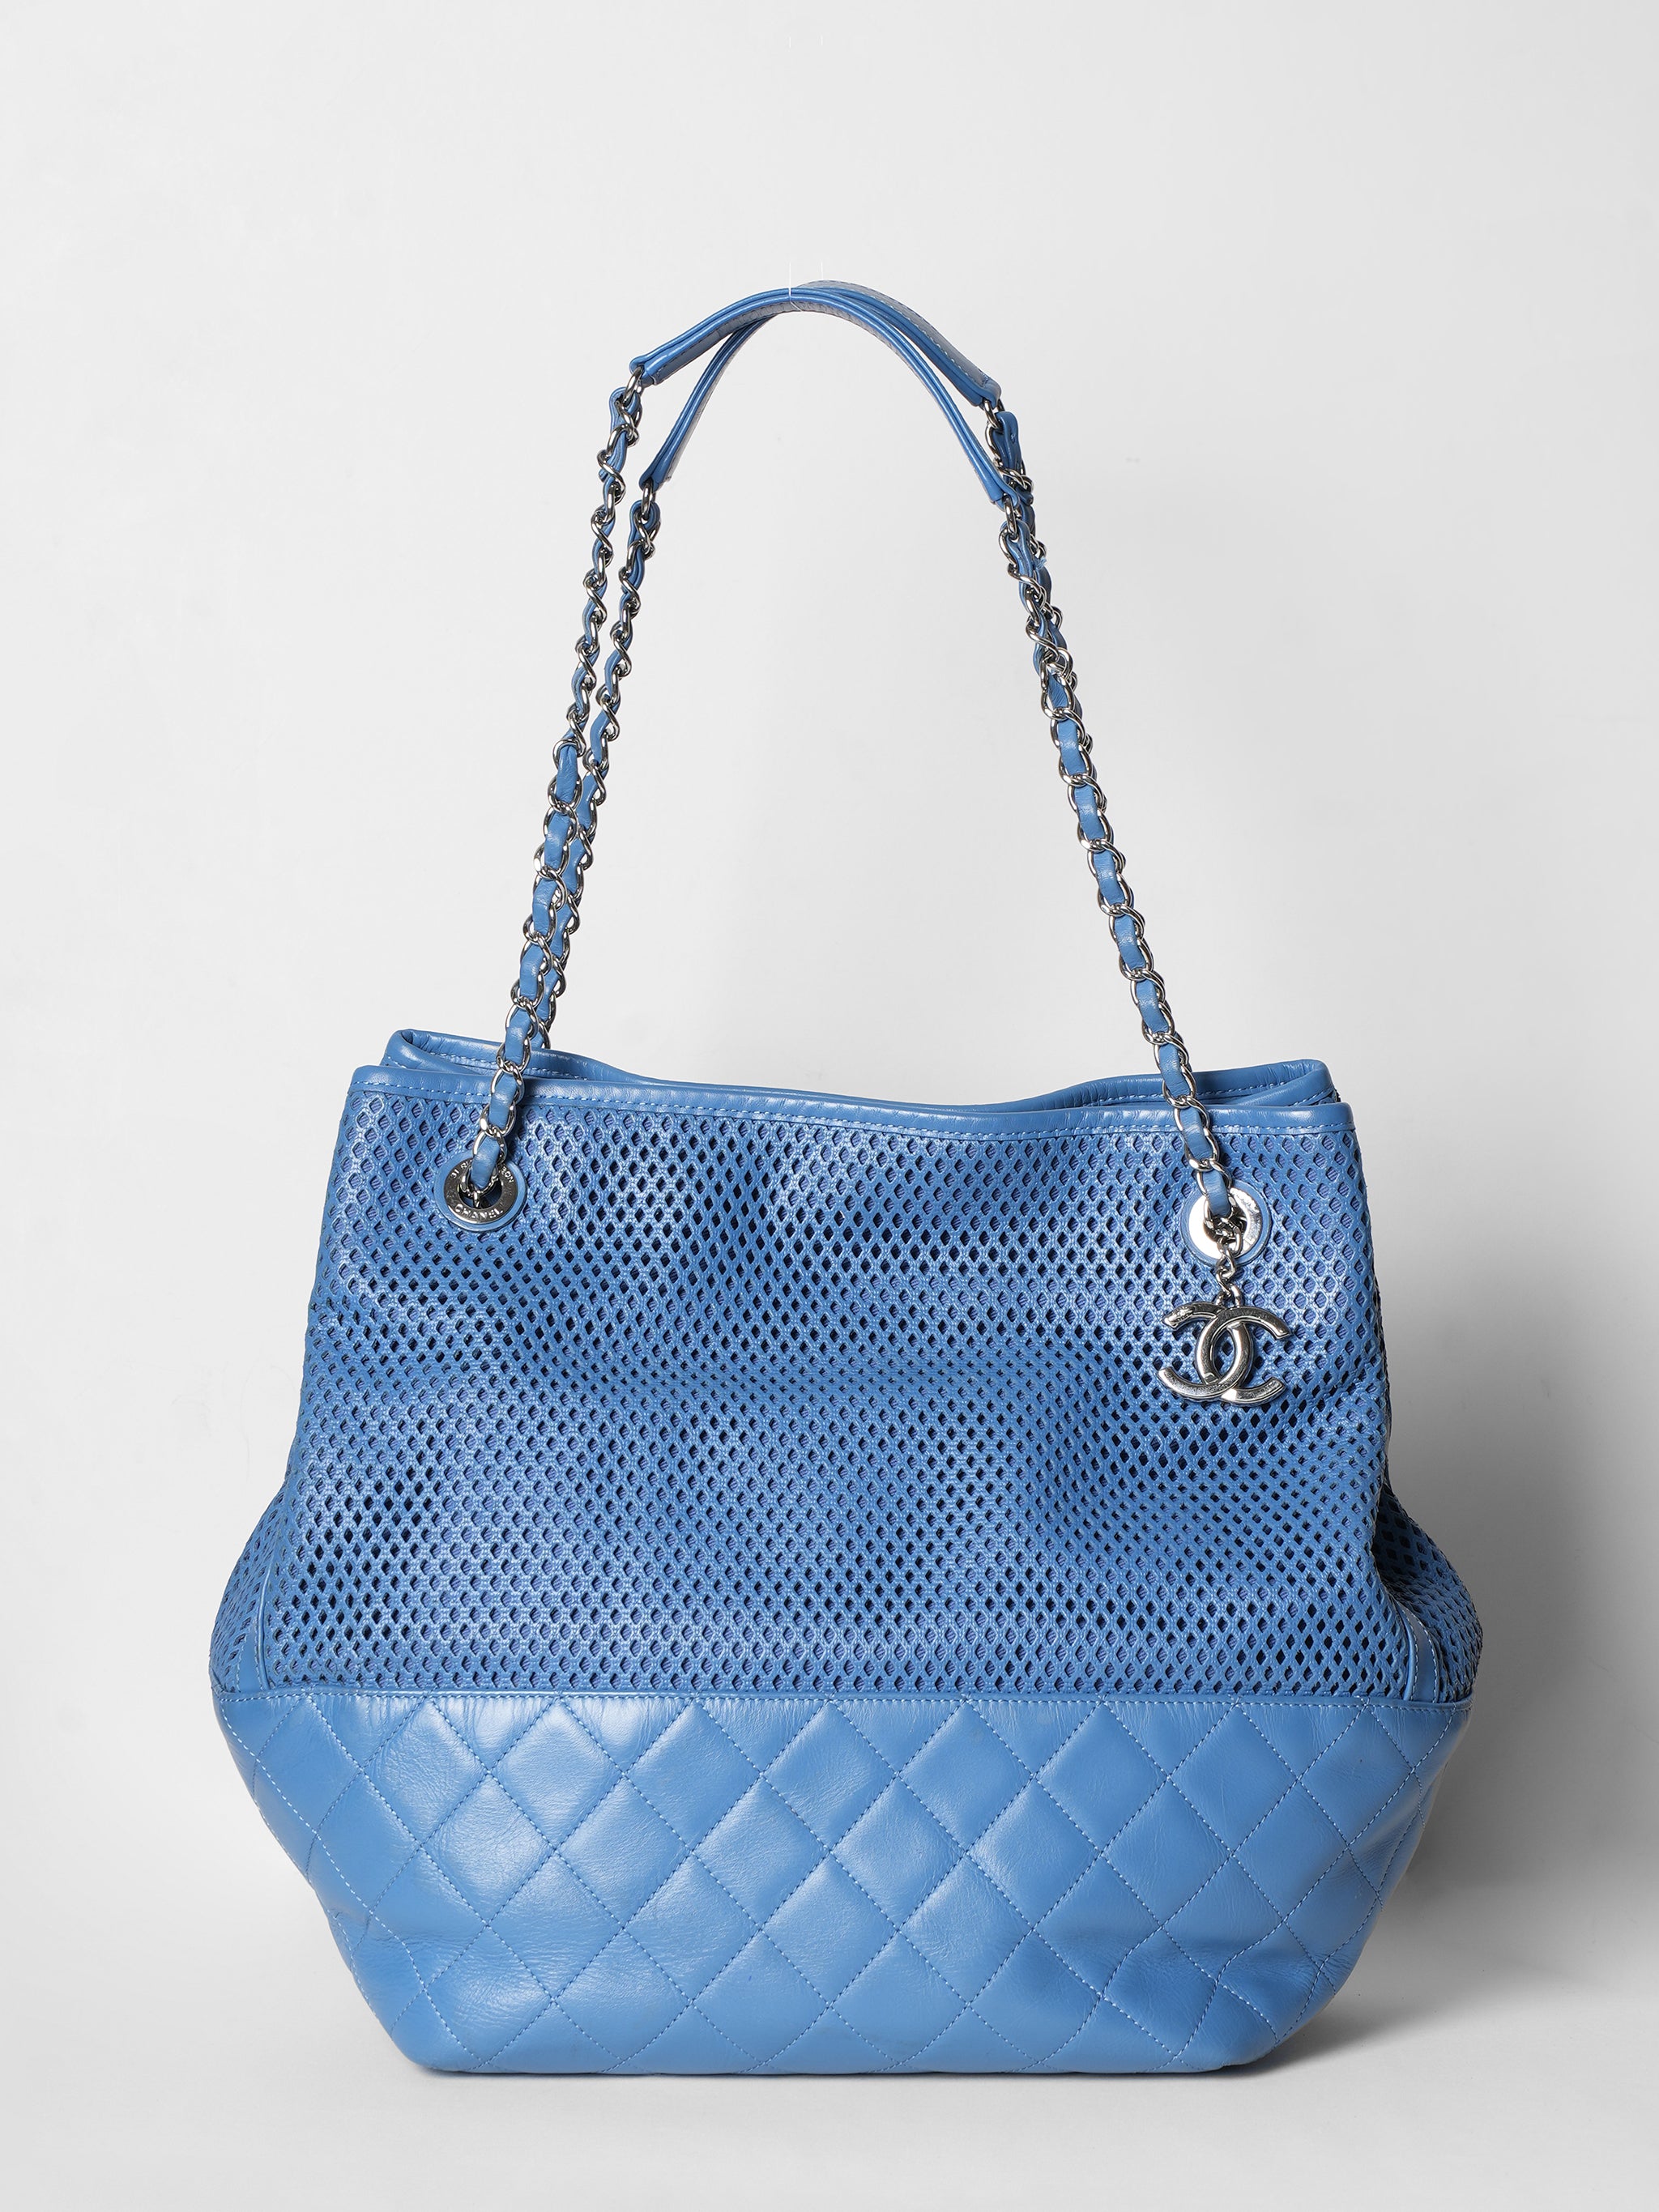 Chanel Up In The Air North South Tote Bag